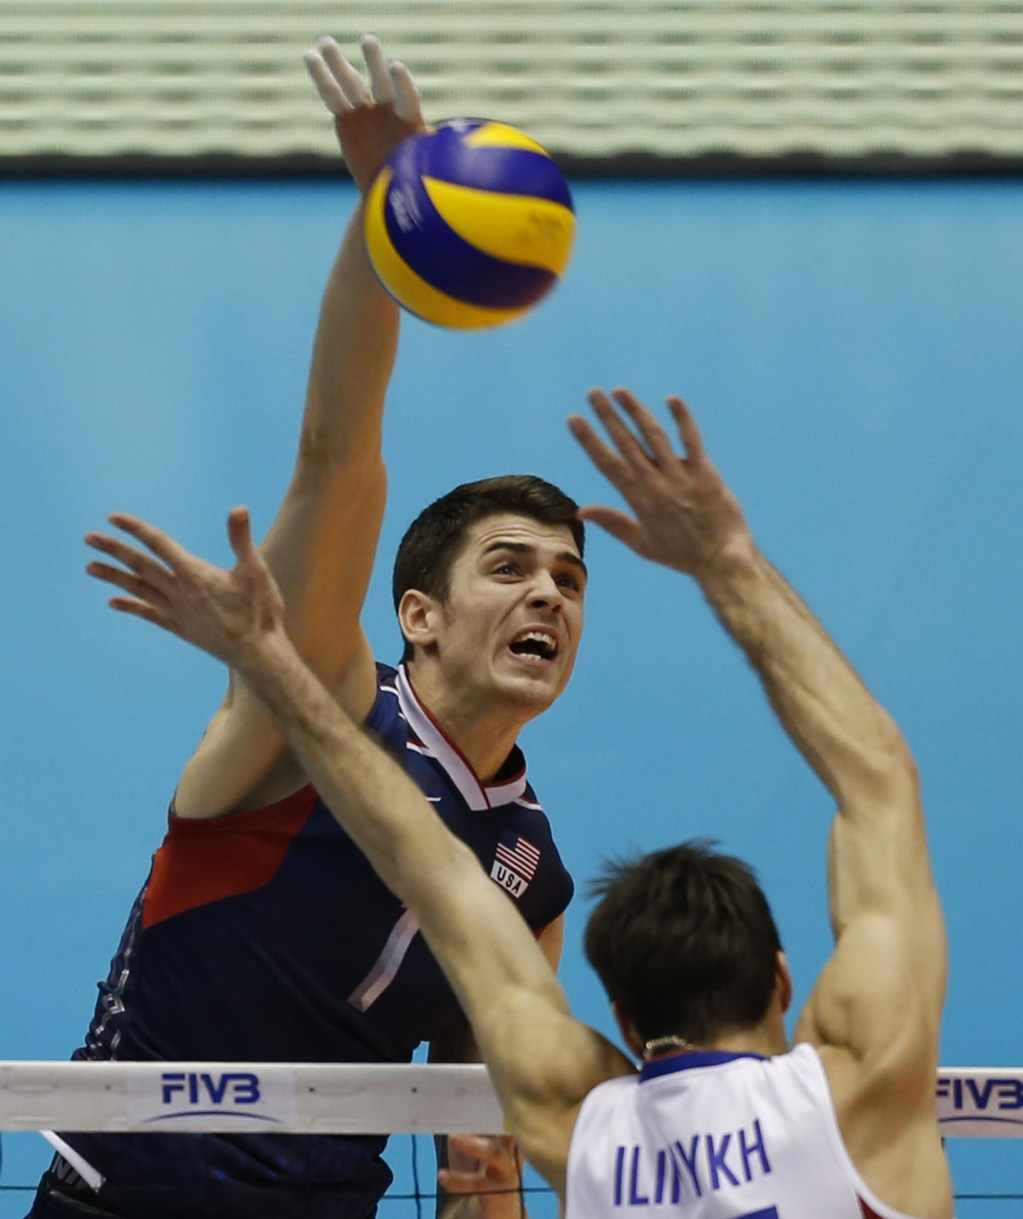 Anderson of the U.S. spikes the ball against Ilinykh of Russia фото (photo)